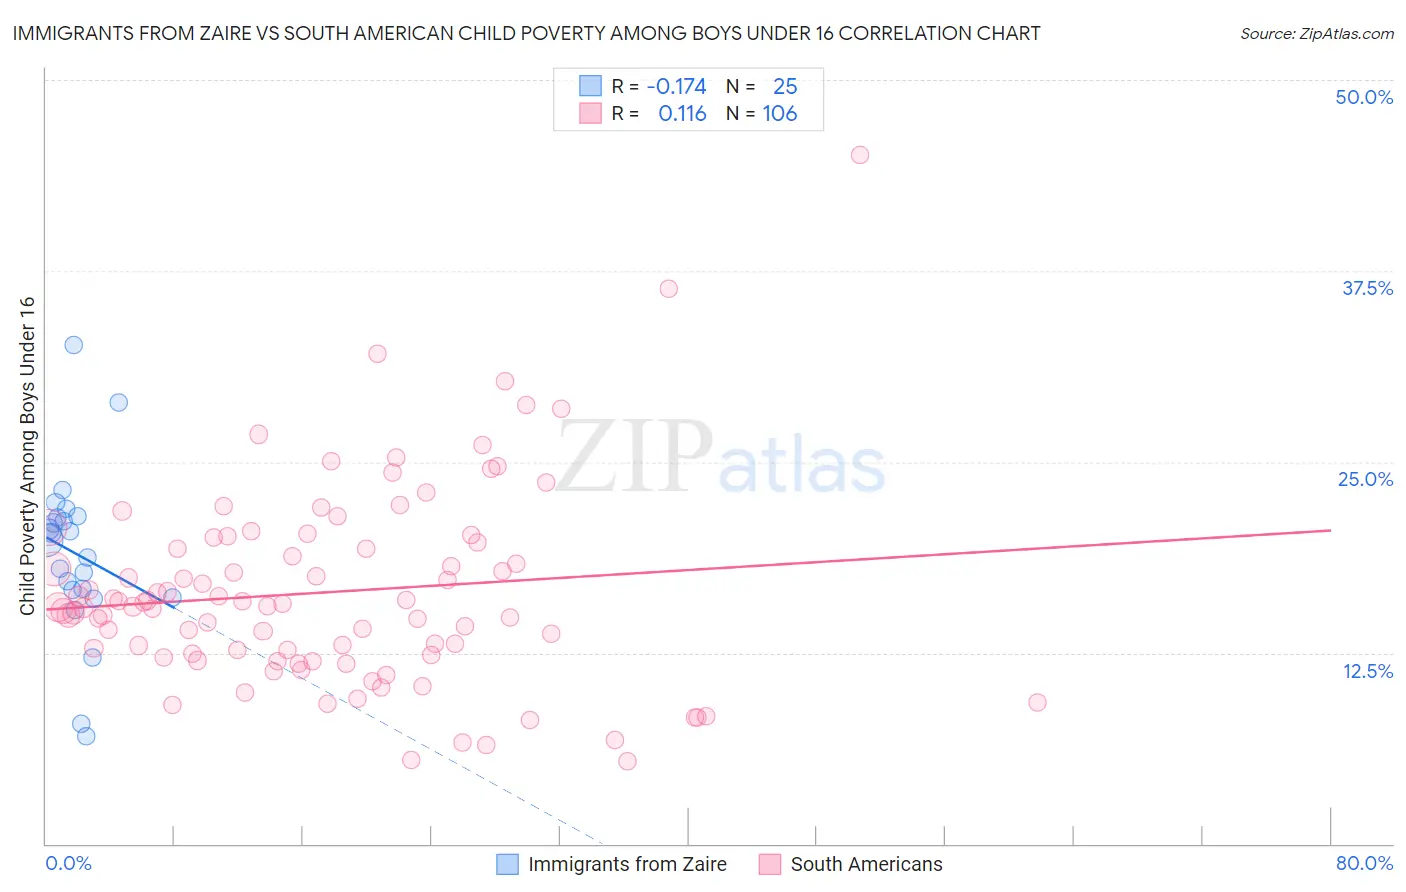 Immigrants from Zaire vs South American Child Poverty Among Boys Under 16